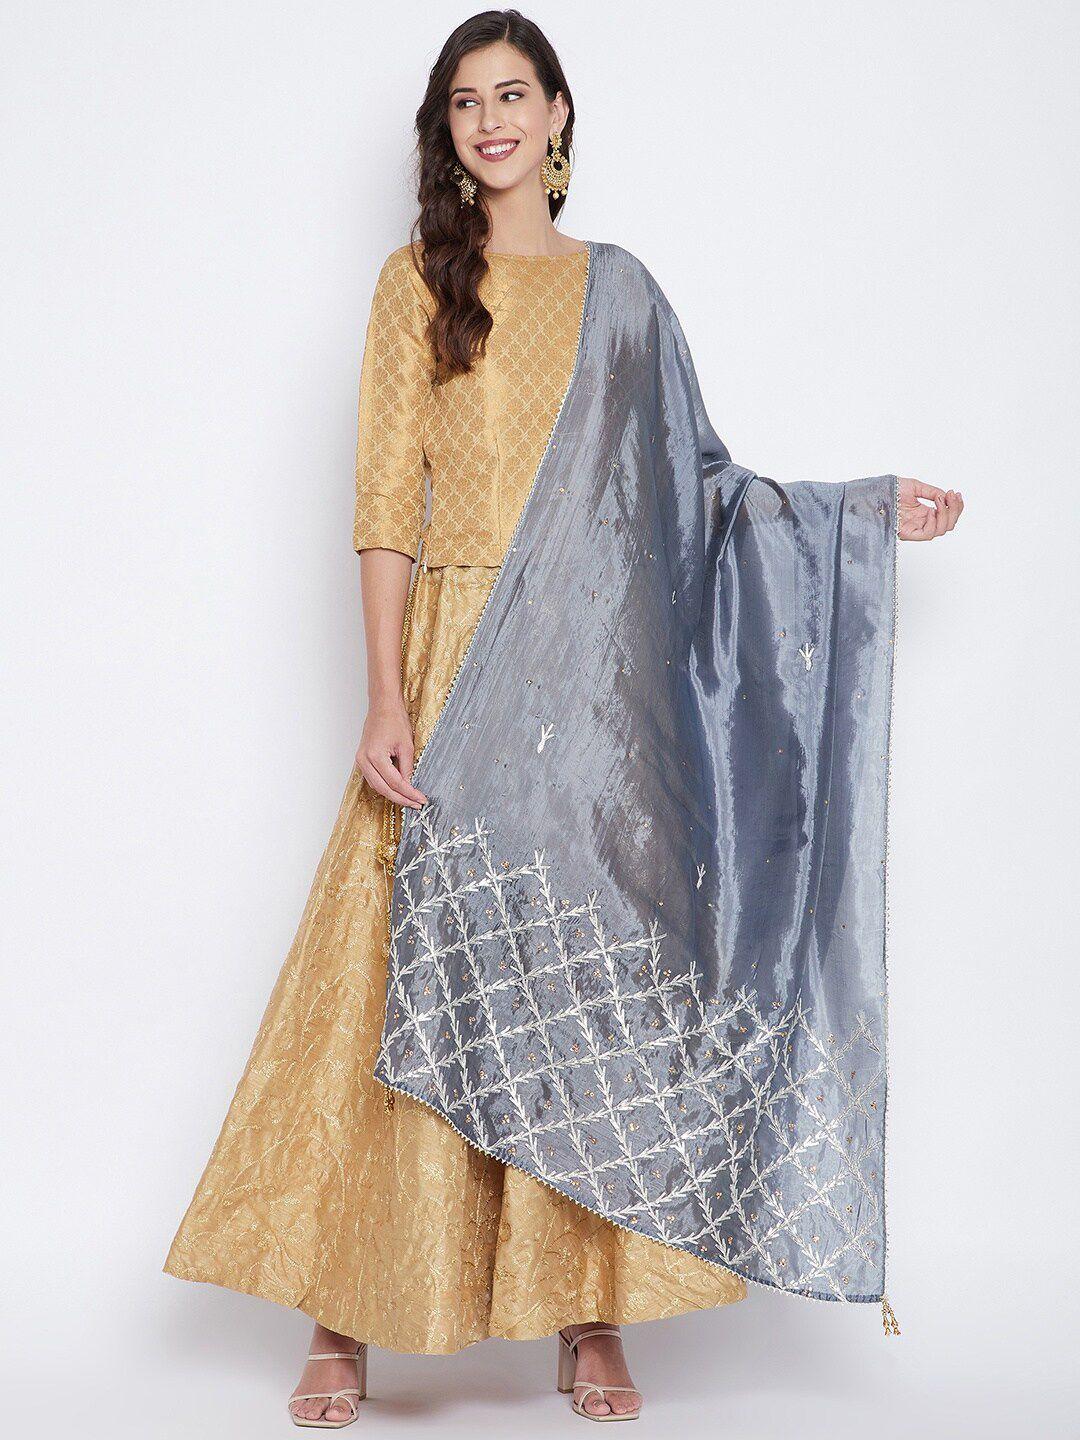 clora-creation-grey-&-white-embroidered-dupatta-with-sequinned